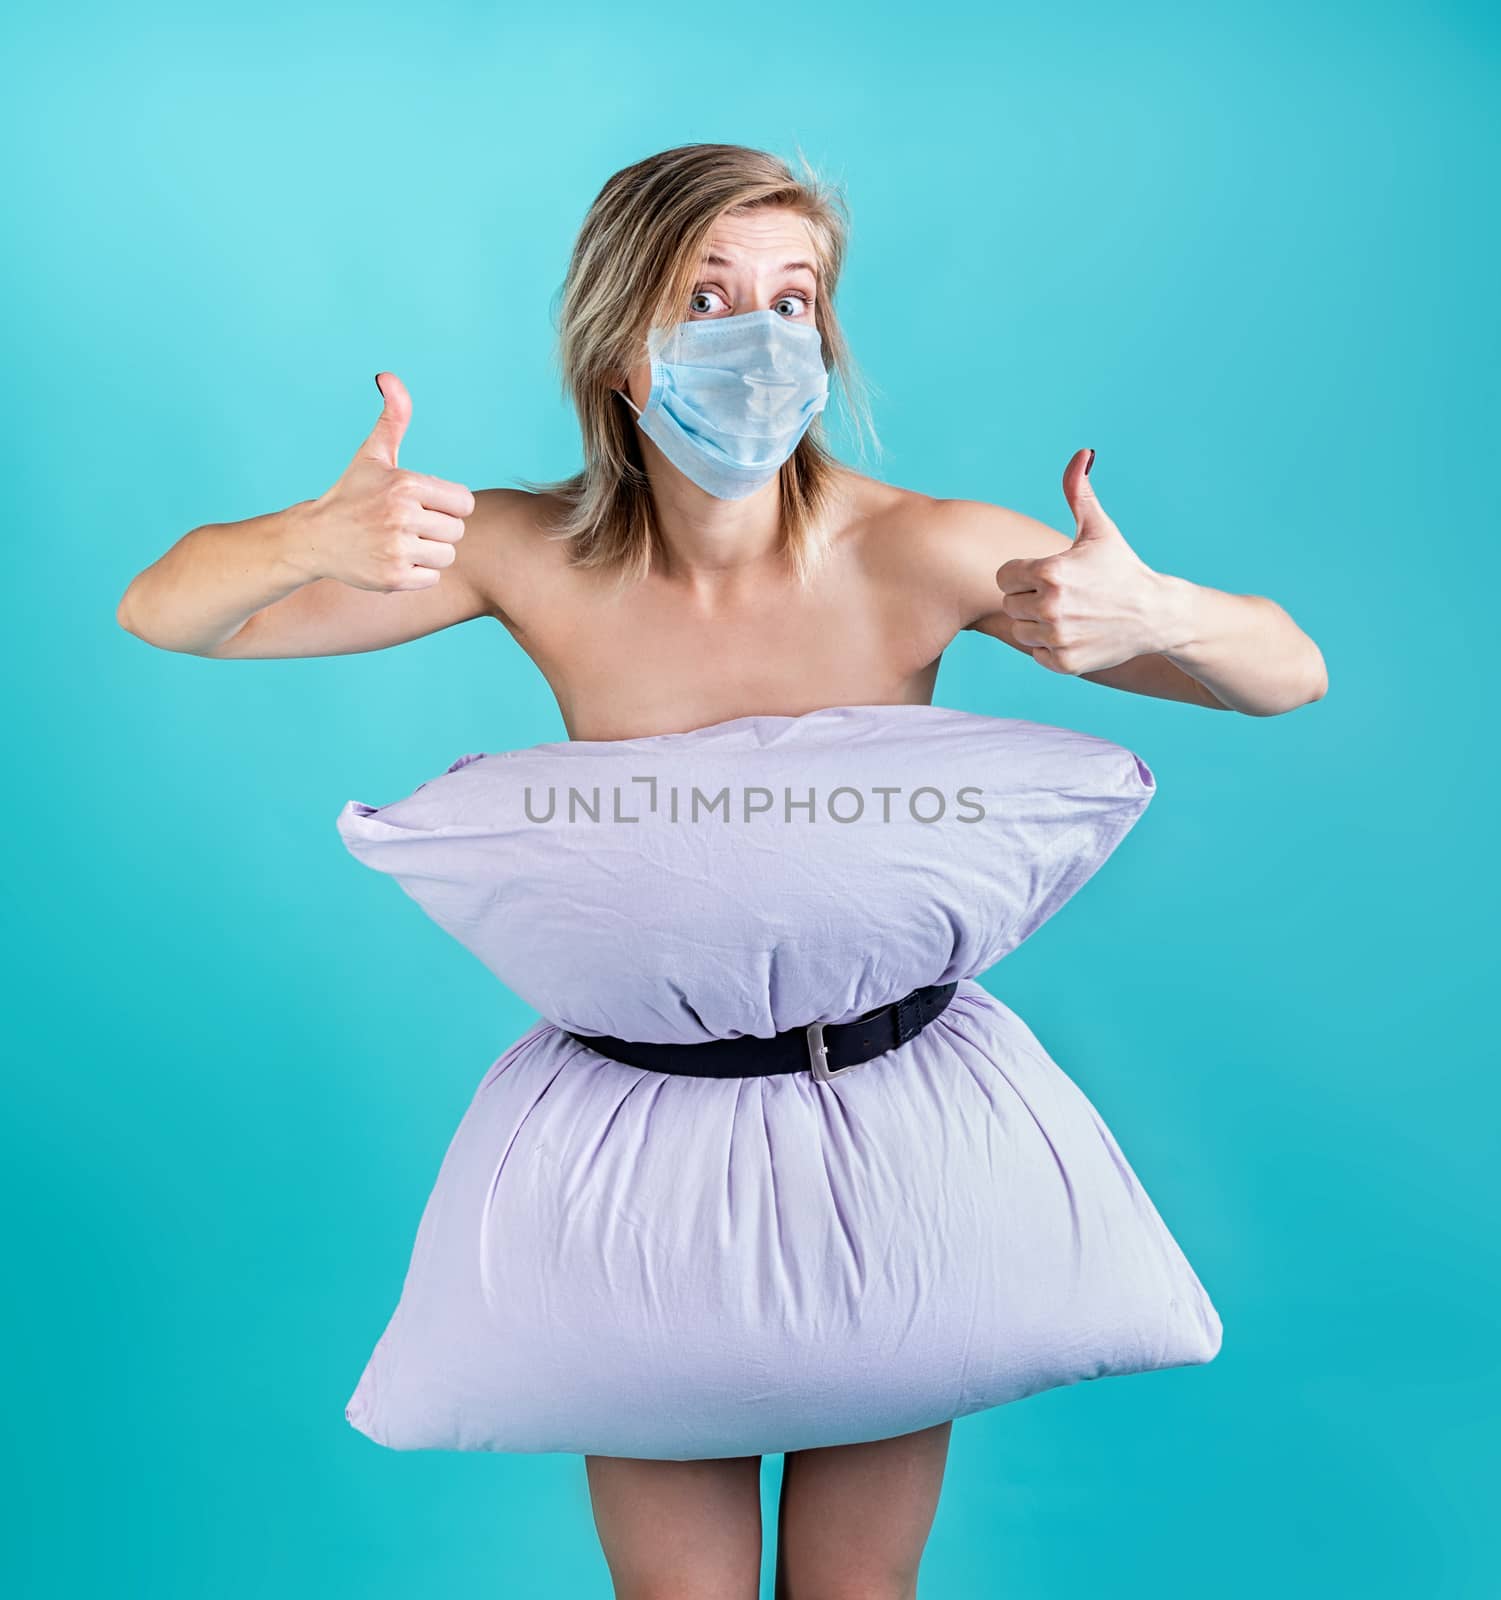 Coronavirus quarantine. Crazy quarantine. Blond woman in pillowdress wearing a mask showing thumbs up isolated on blue background. Pillow challenge outbreak